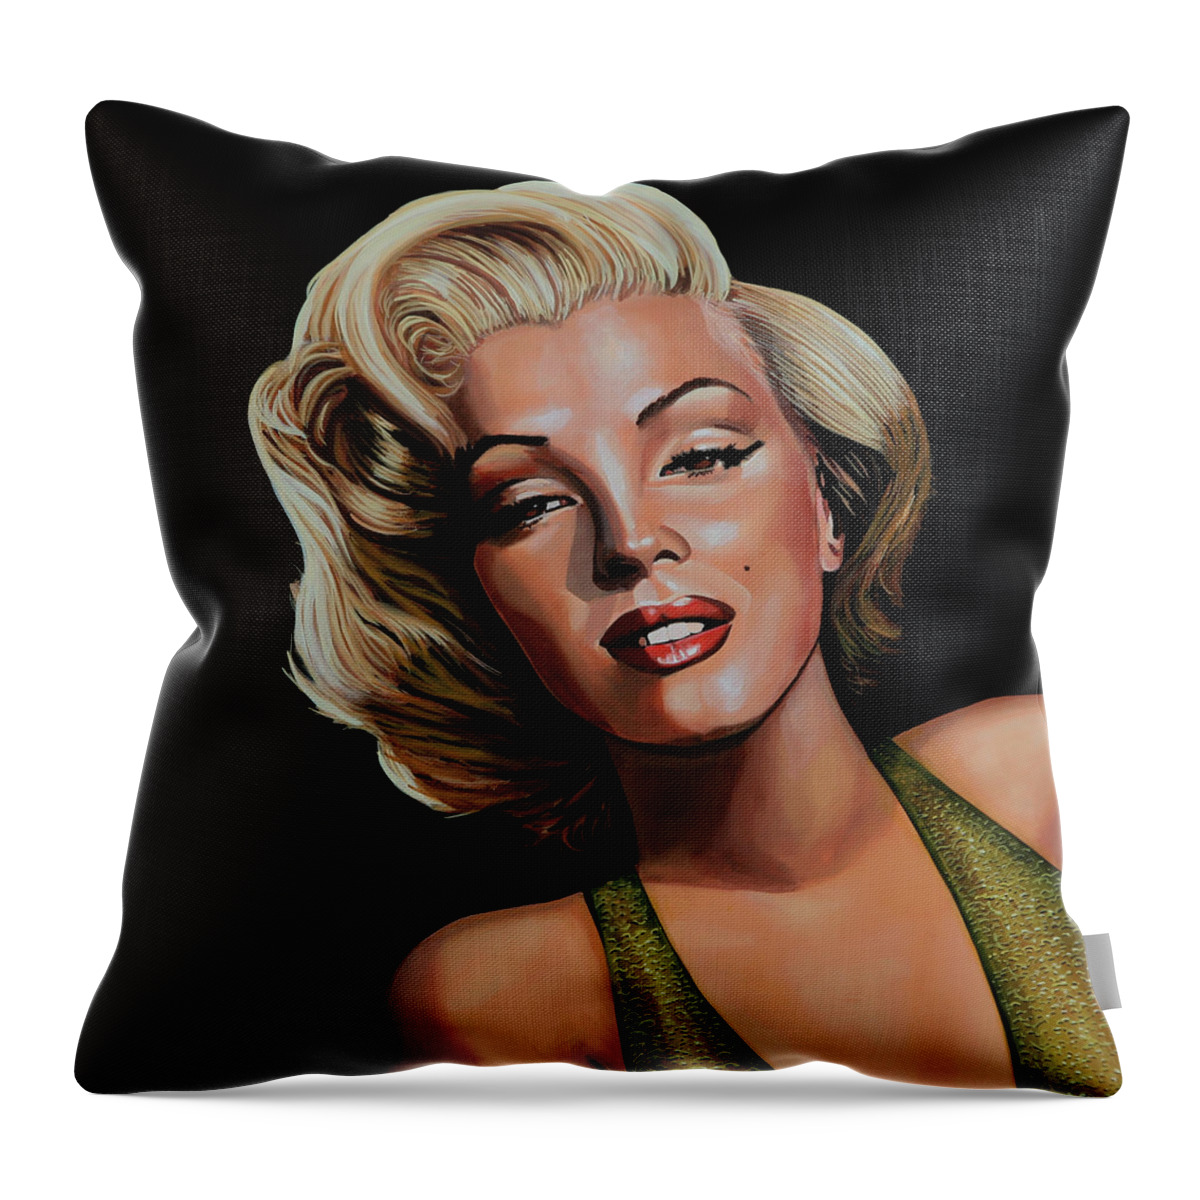 Marilyn Monroe Throw Pillow featuring the painting Marilyn Monroe 2 by Paul Meijering